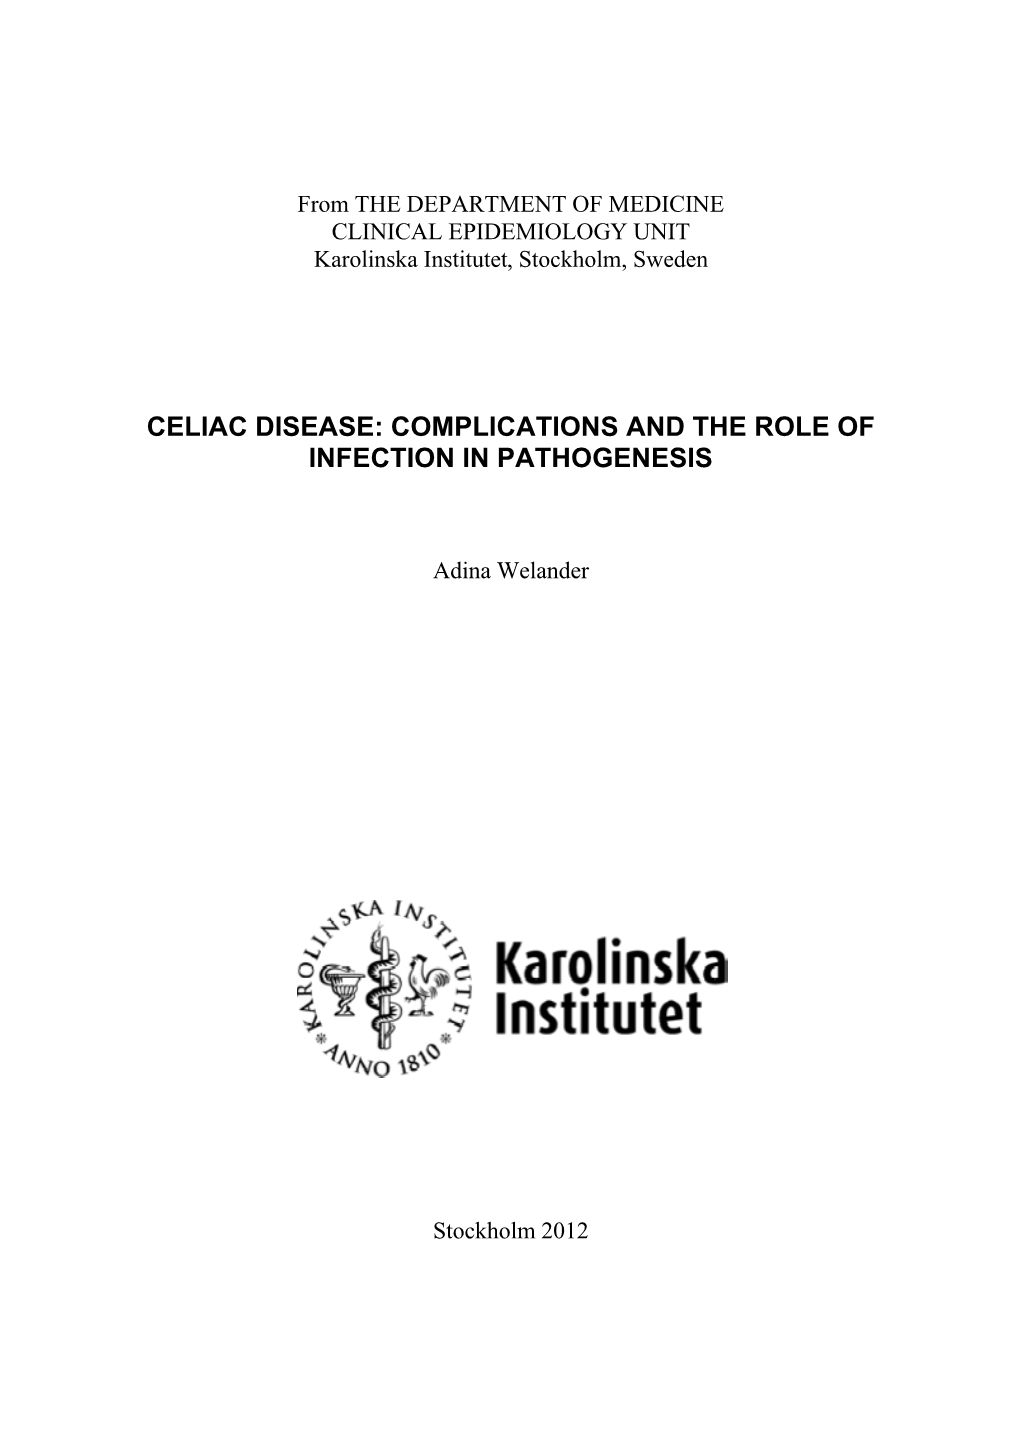 Celiac Disease: Complications and the Role of Infection in Pathogenesis